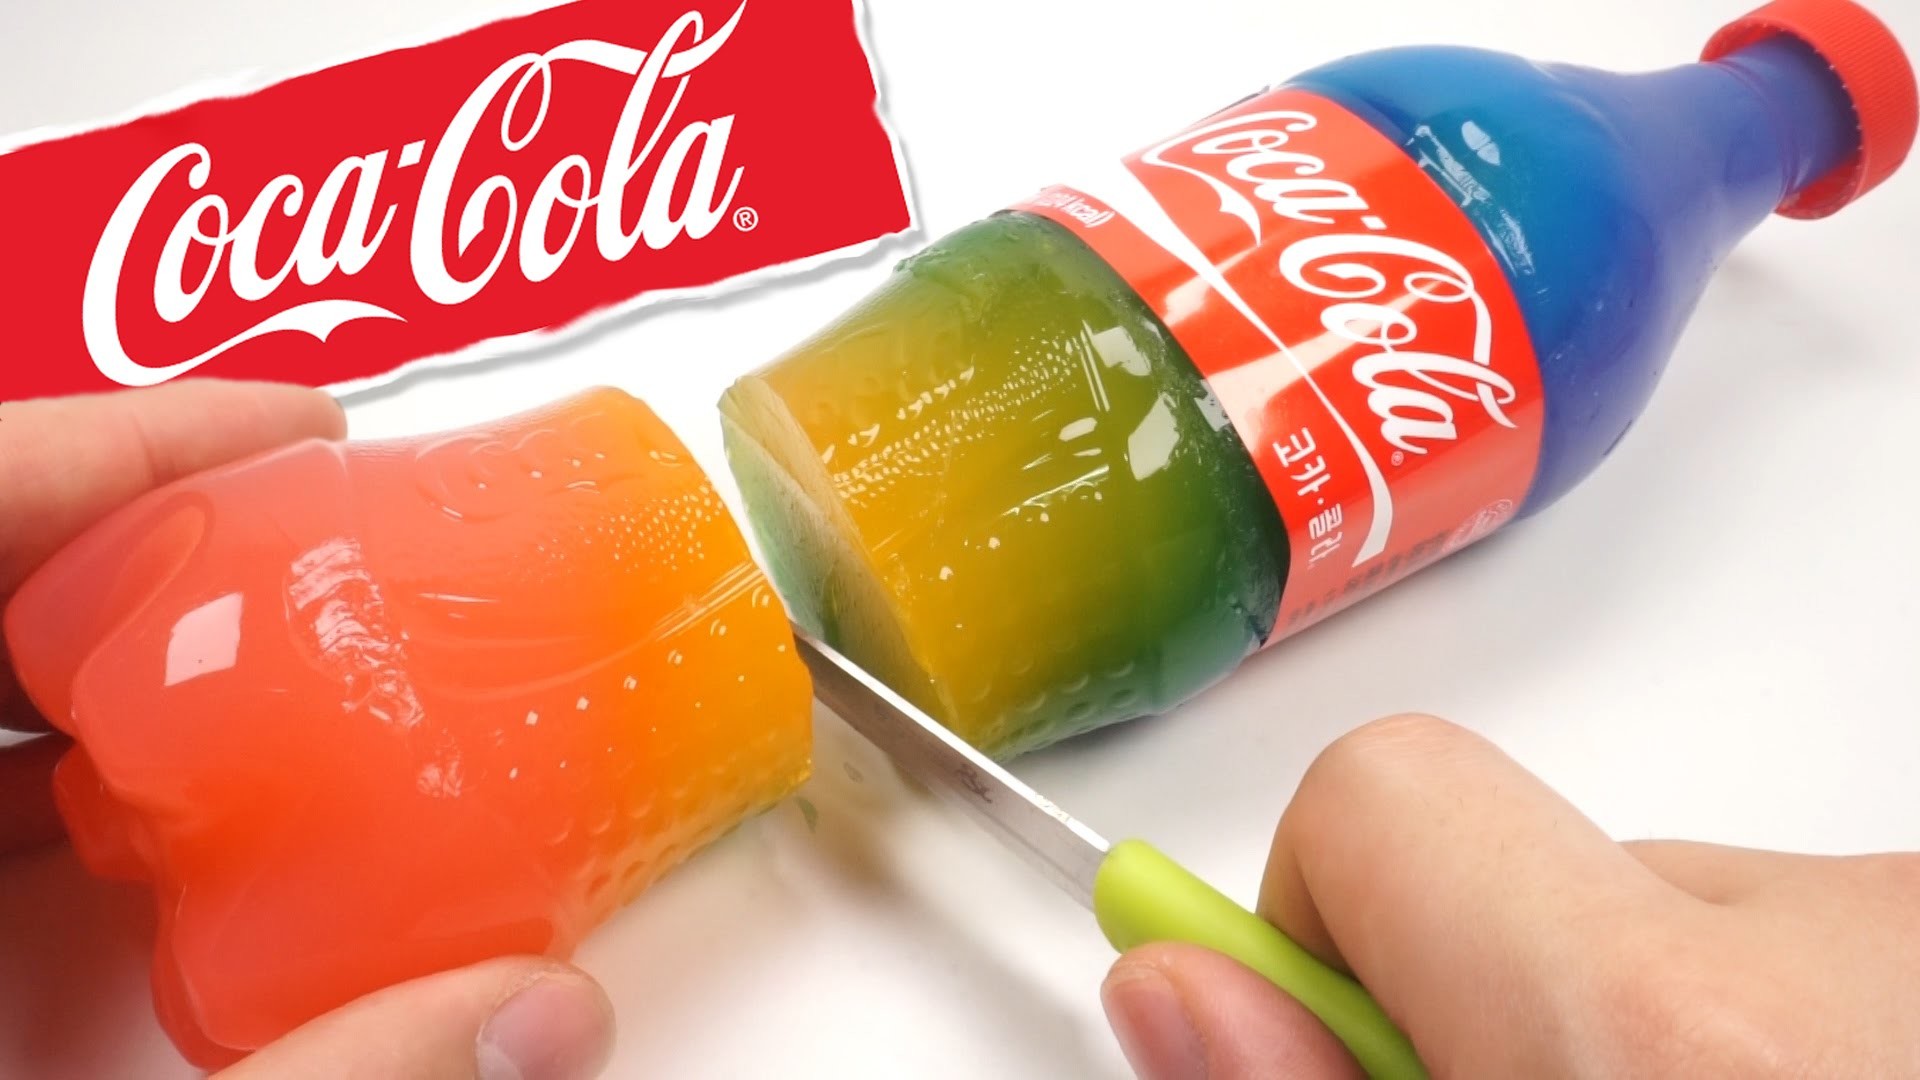 1920x1080 How To Make Rainbow Coca Cola Bottle Pudding Jelly DIY Cooking Surprise  Coke Jelly Recipe - YouTube